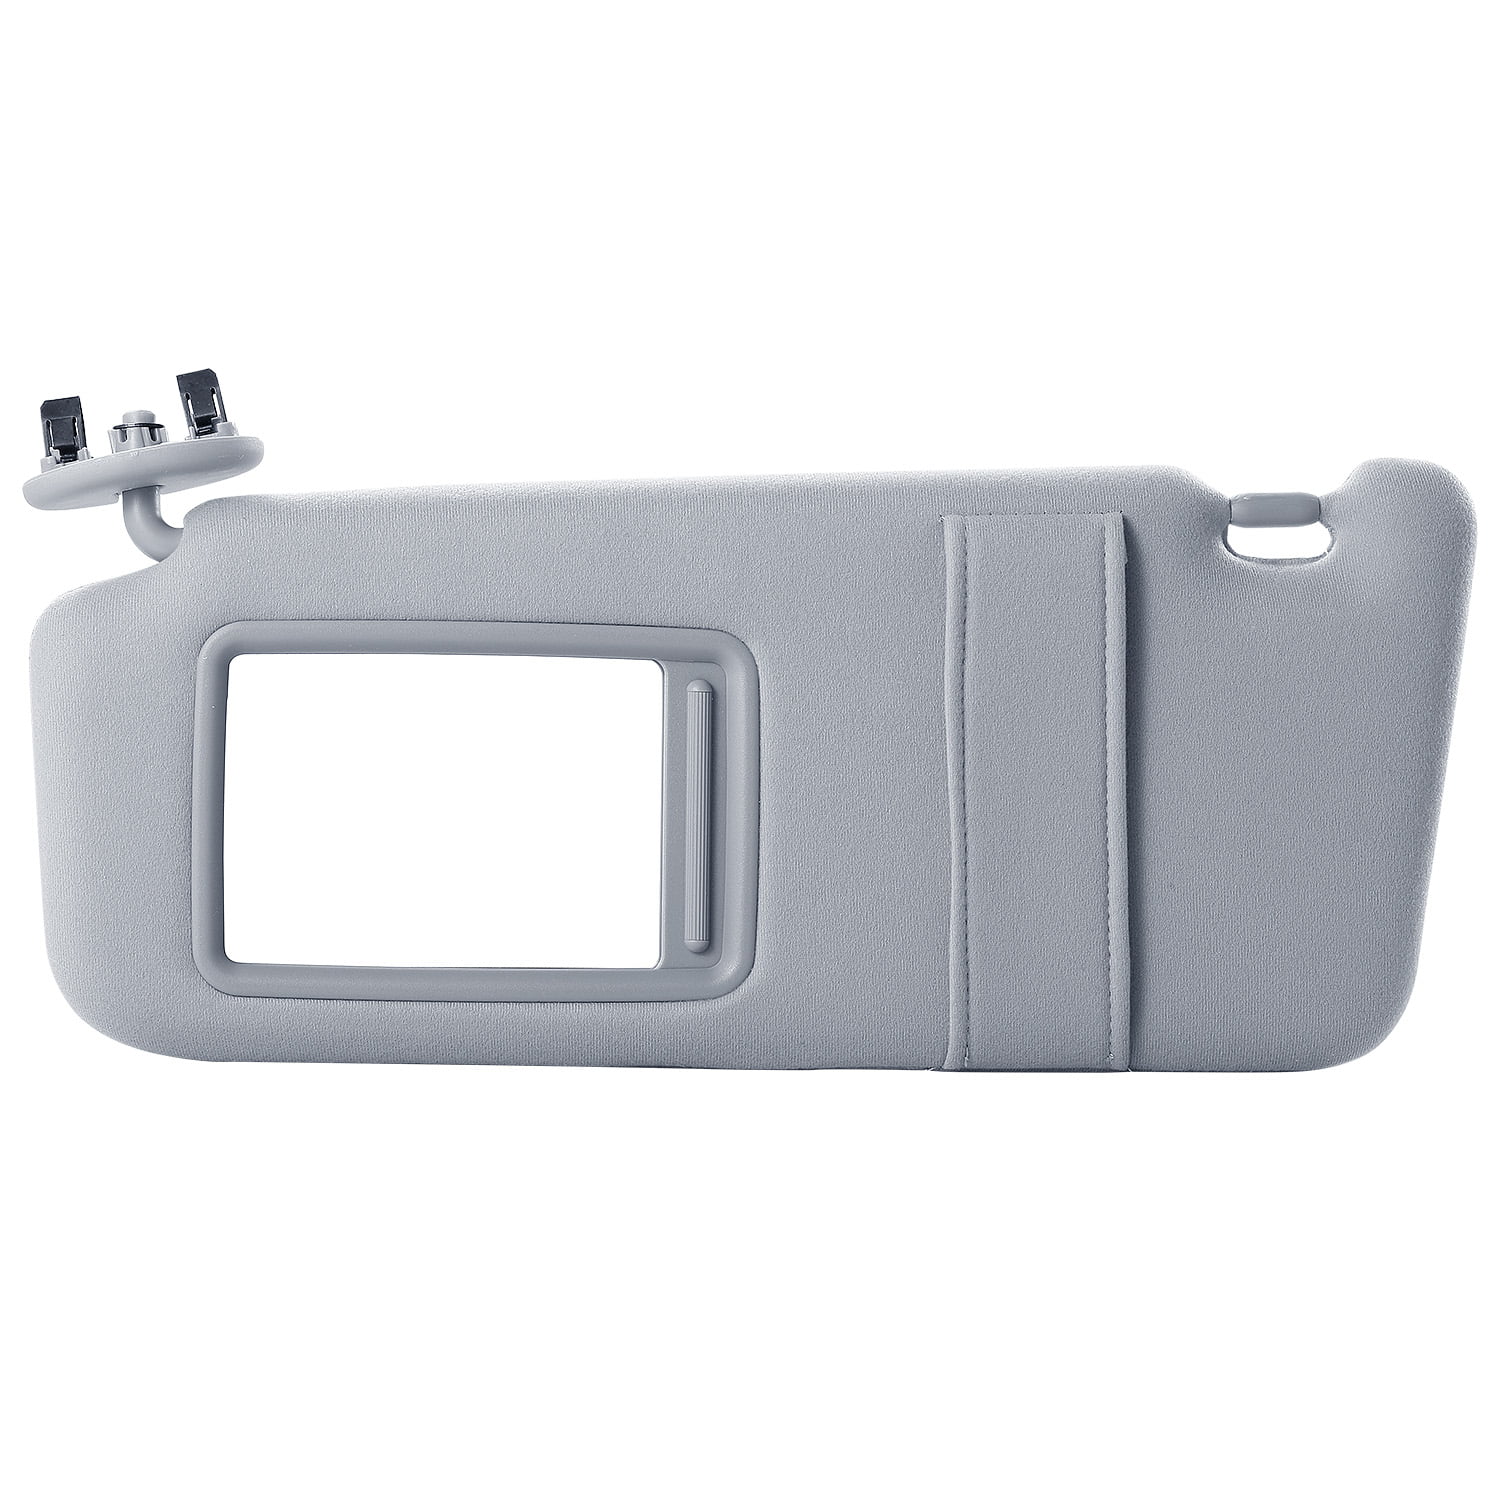 Toyota Camry 2007-2011 New Gray Drivers Side Sun Visor With Sunroof